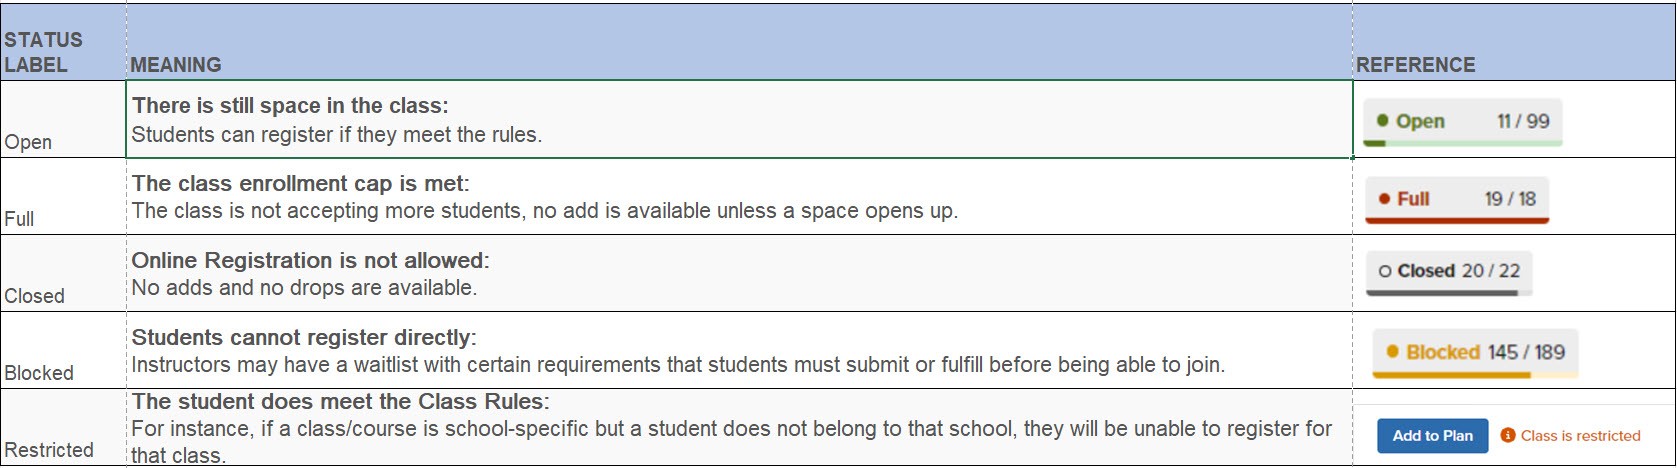 This image depicts the 4 Class Statuses: Open, Closed, Full, Blocked, and Restricted. It also details what each status means regarding class availability and contains the associated image references in the final column. A more detailed version of this table is available in the drop-down below titled "Accessible Format: Class Status Table" 